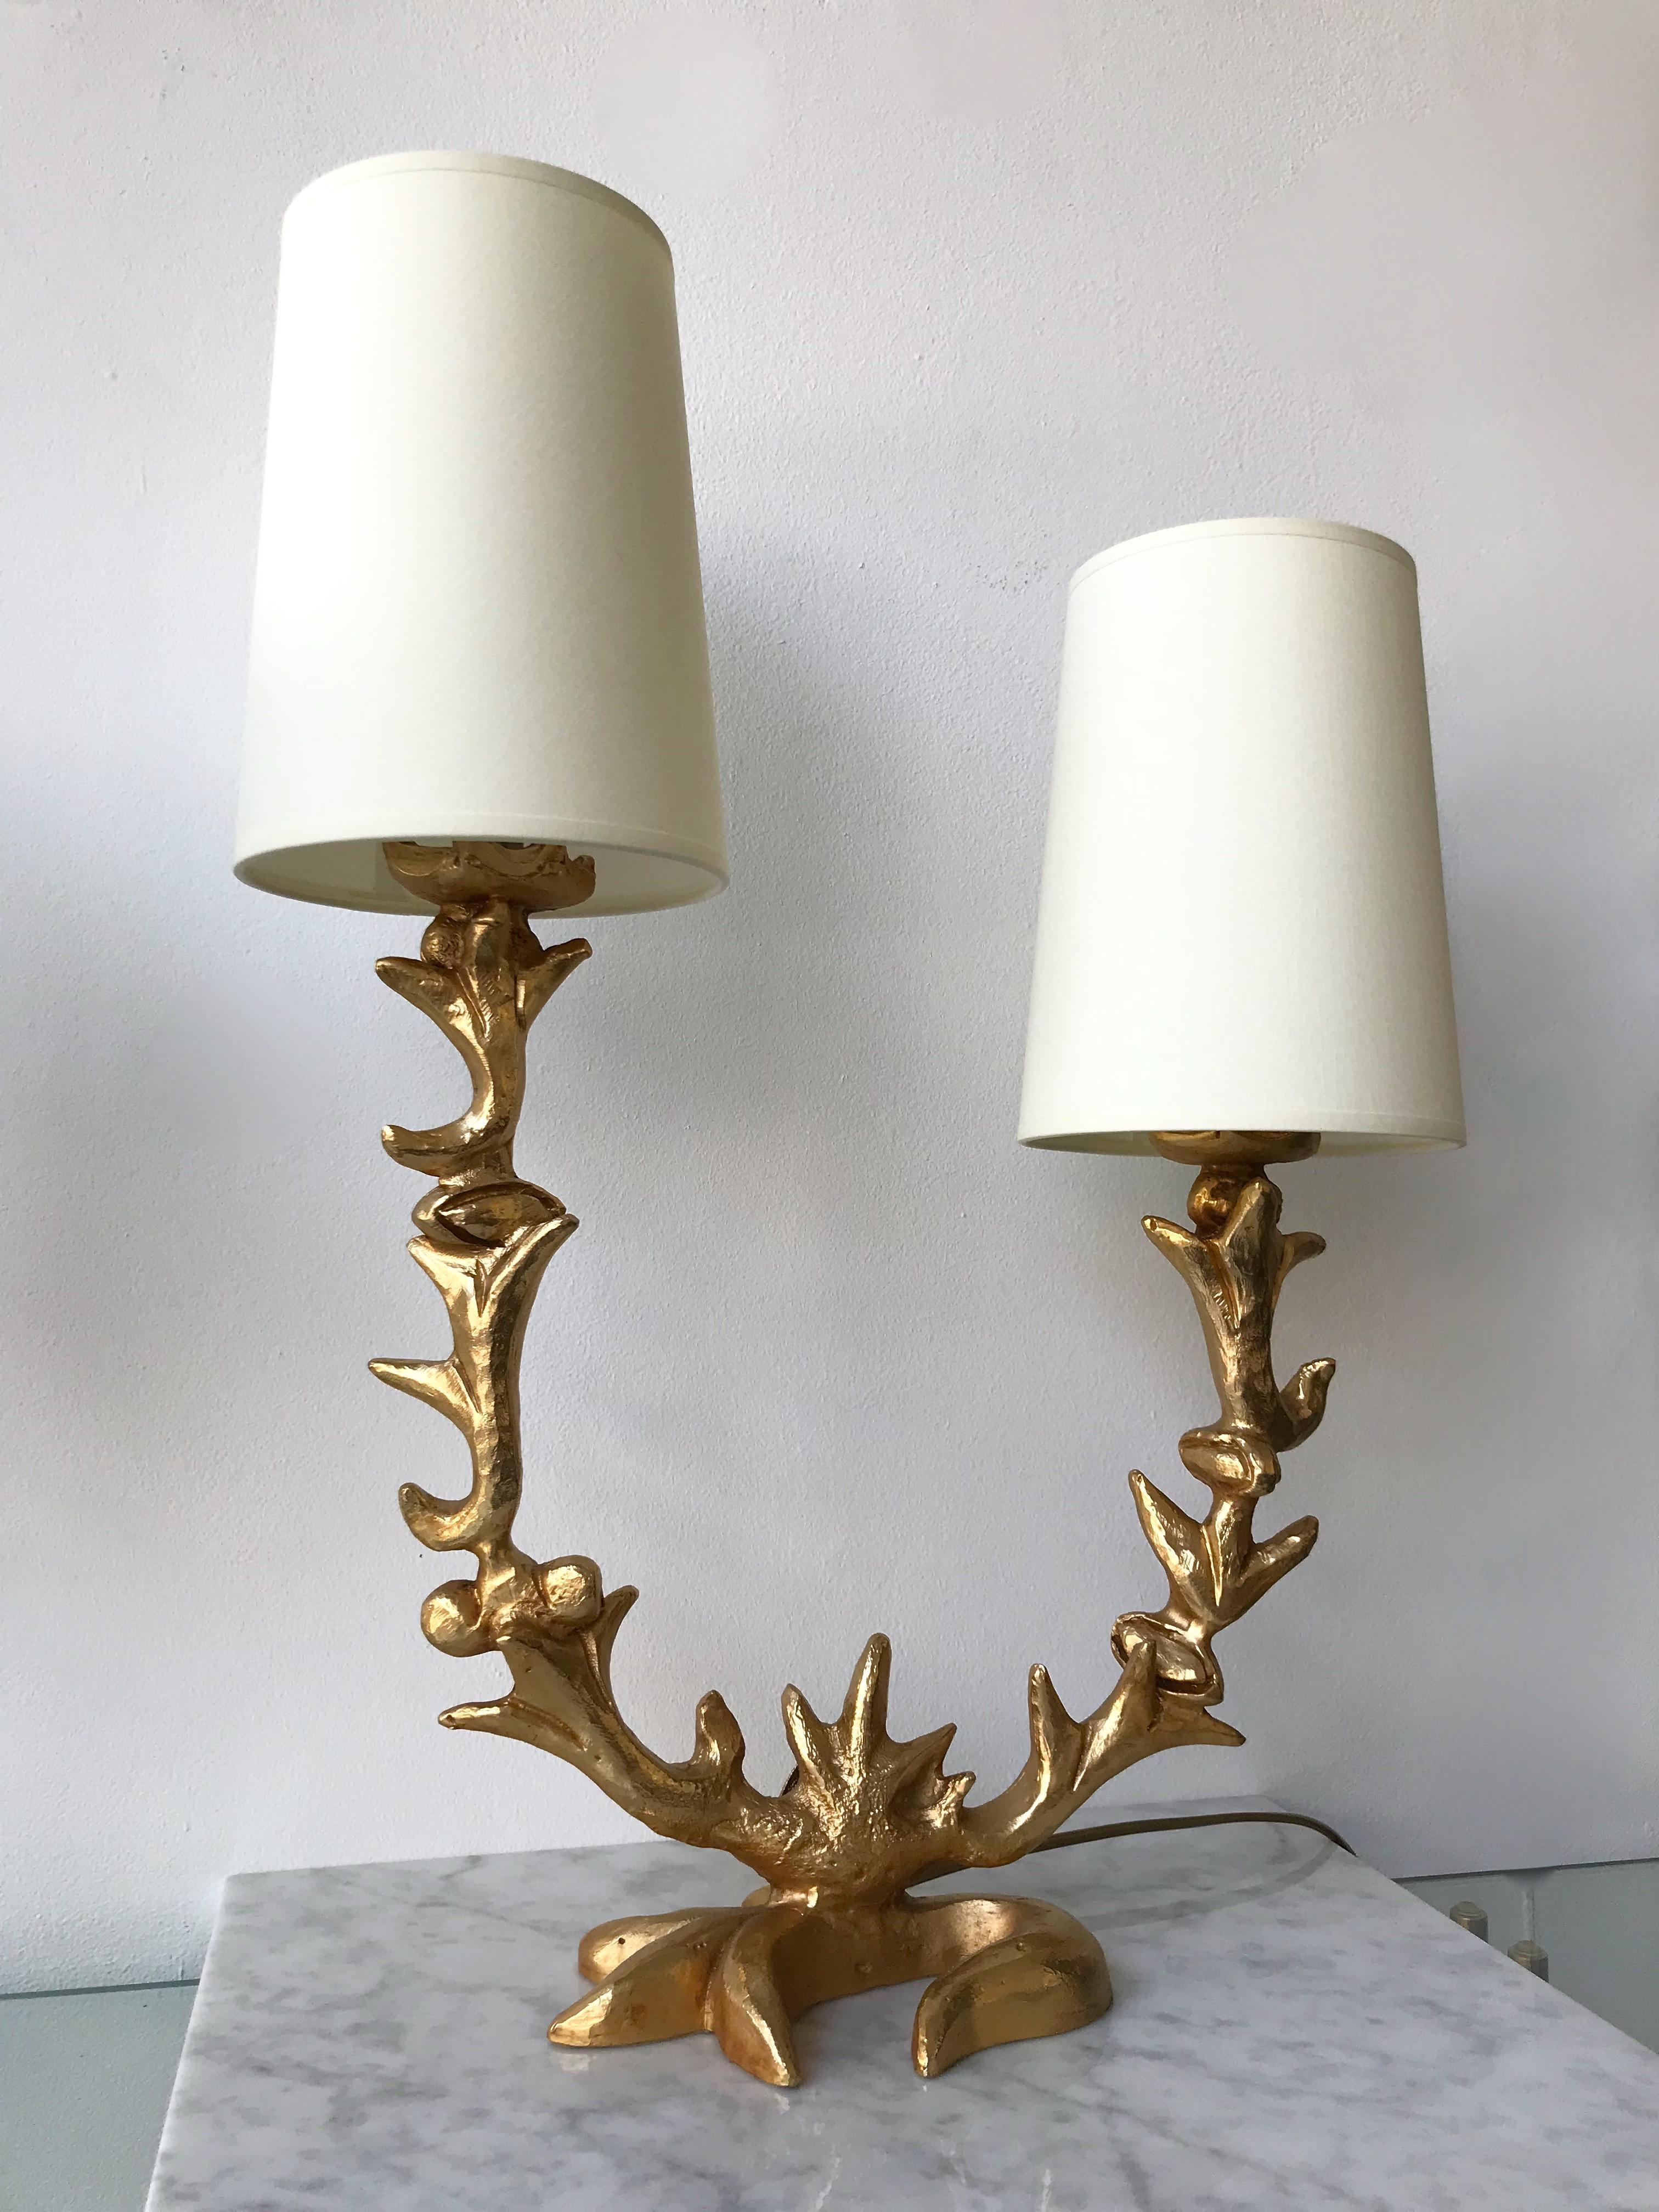 Gilt Pair of Lamps by Mathias for Fondica, France, 1995